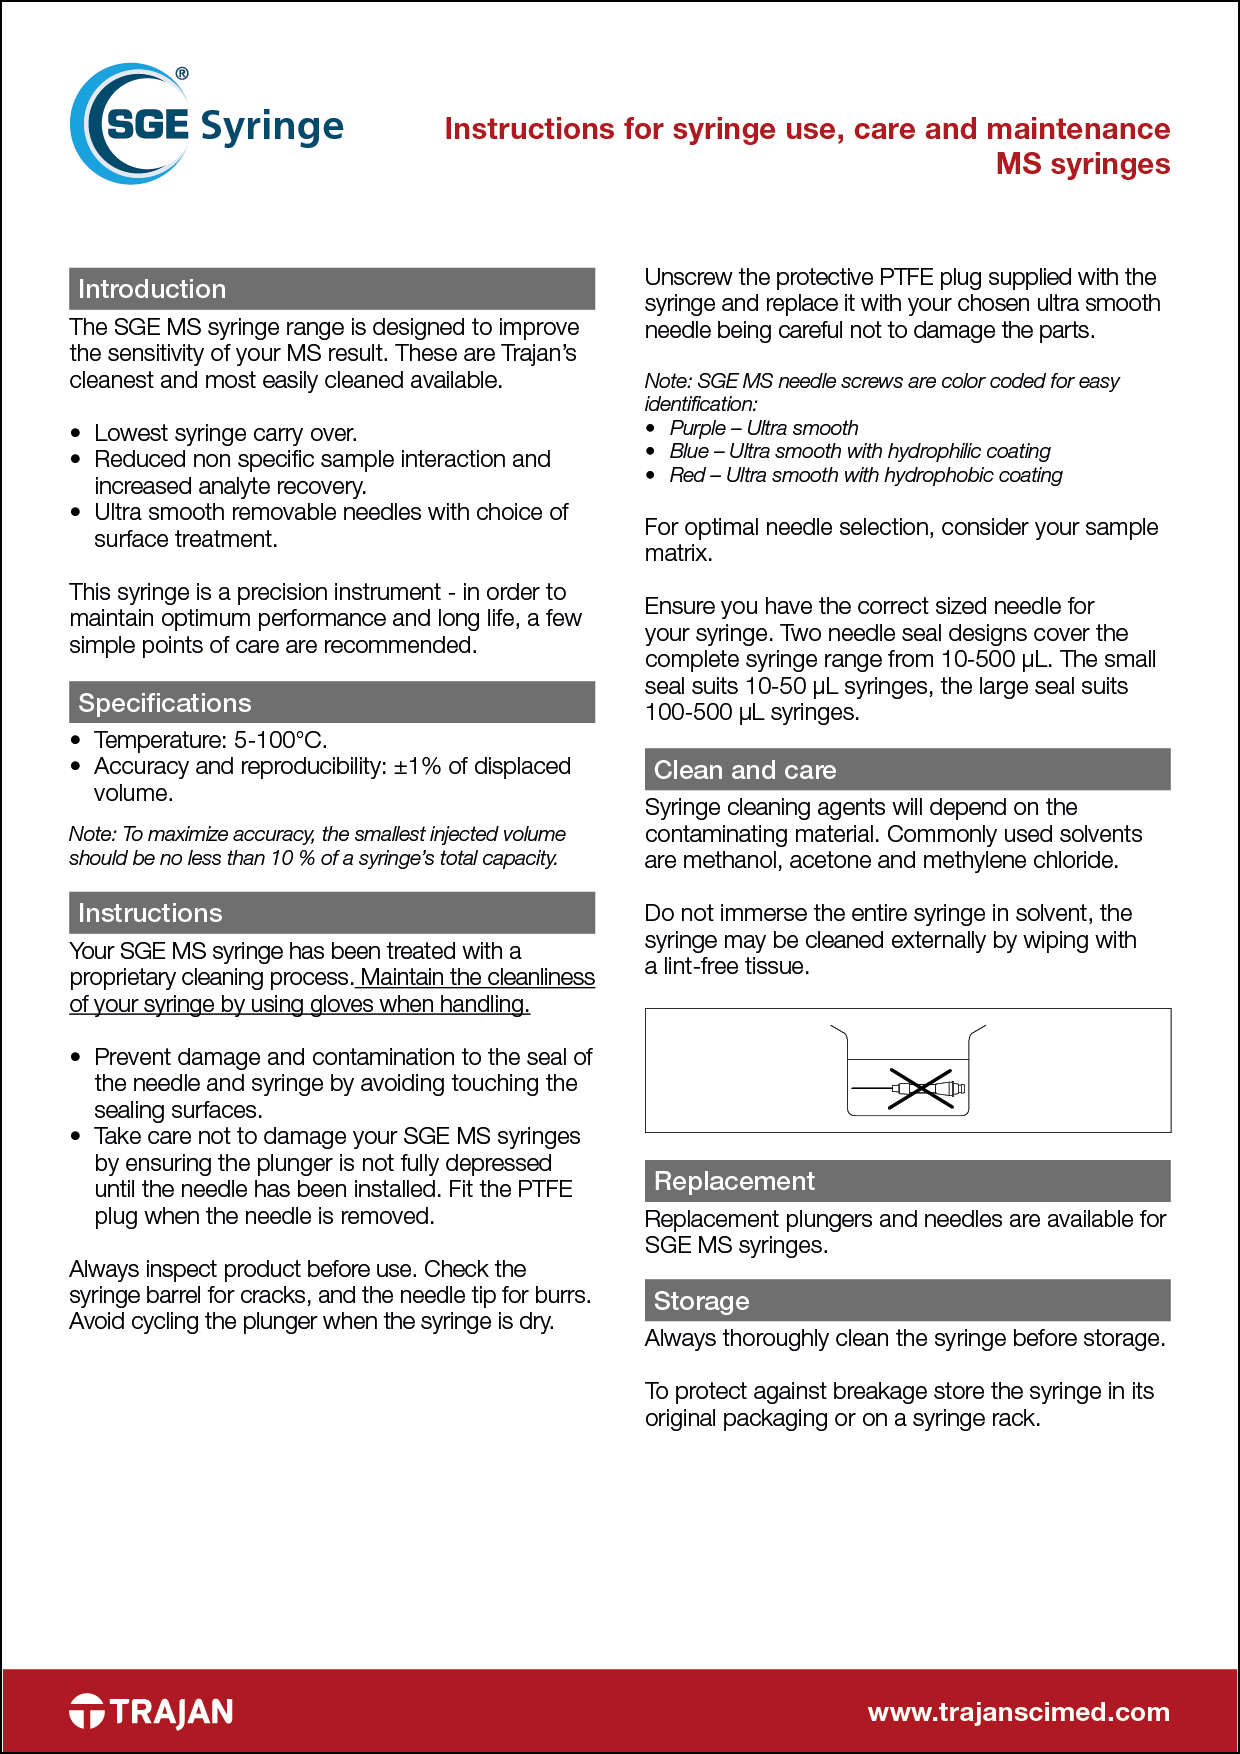 Manual - Instructions for syringe use, care and maintenance MS syringes